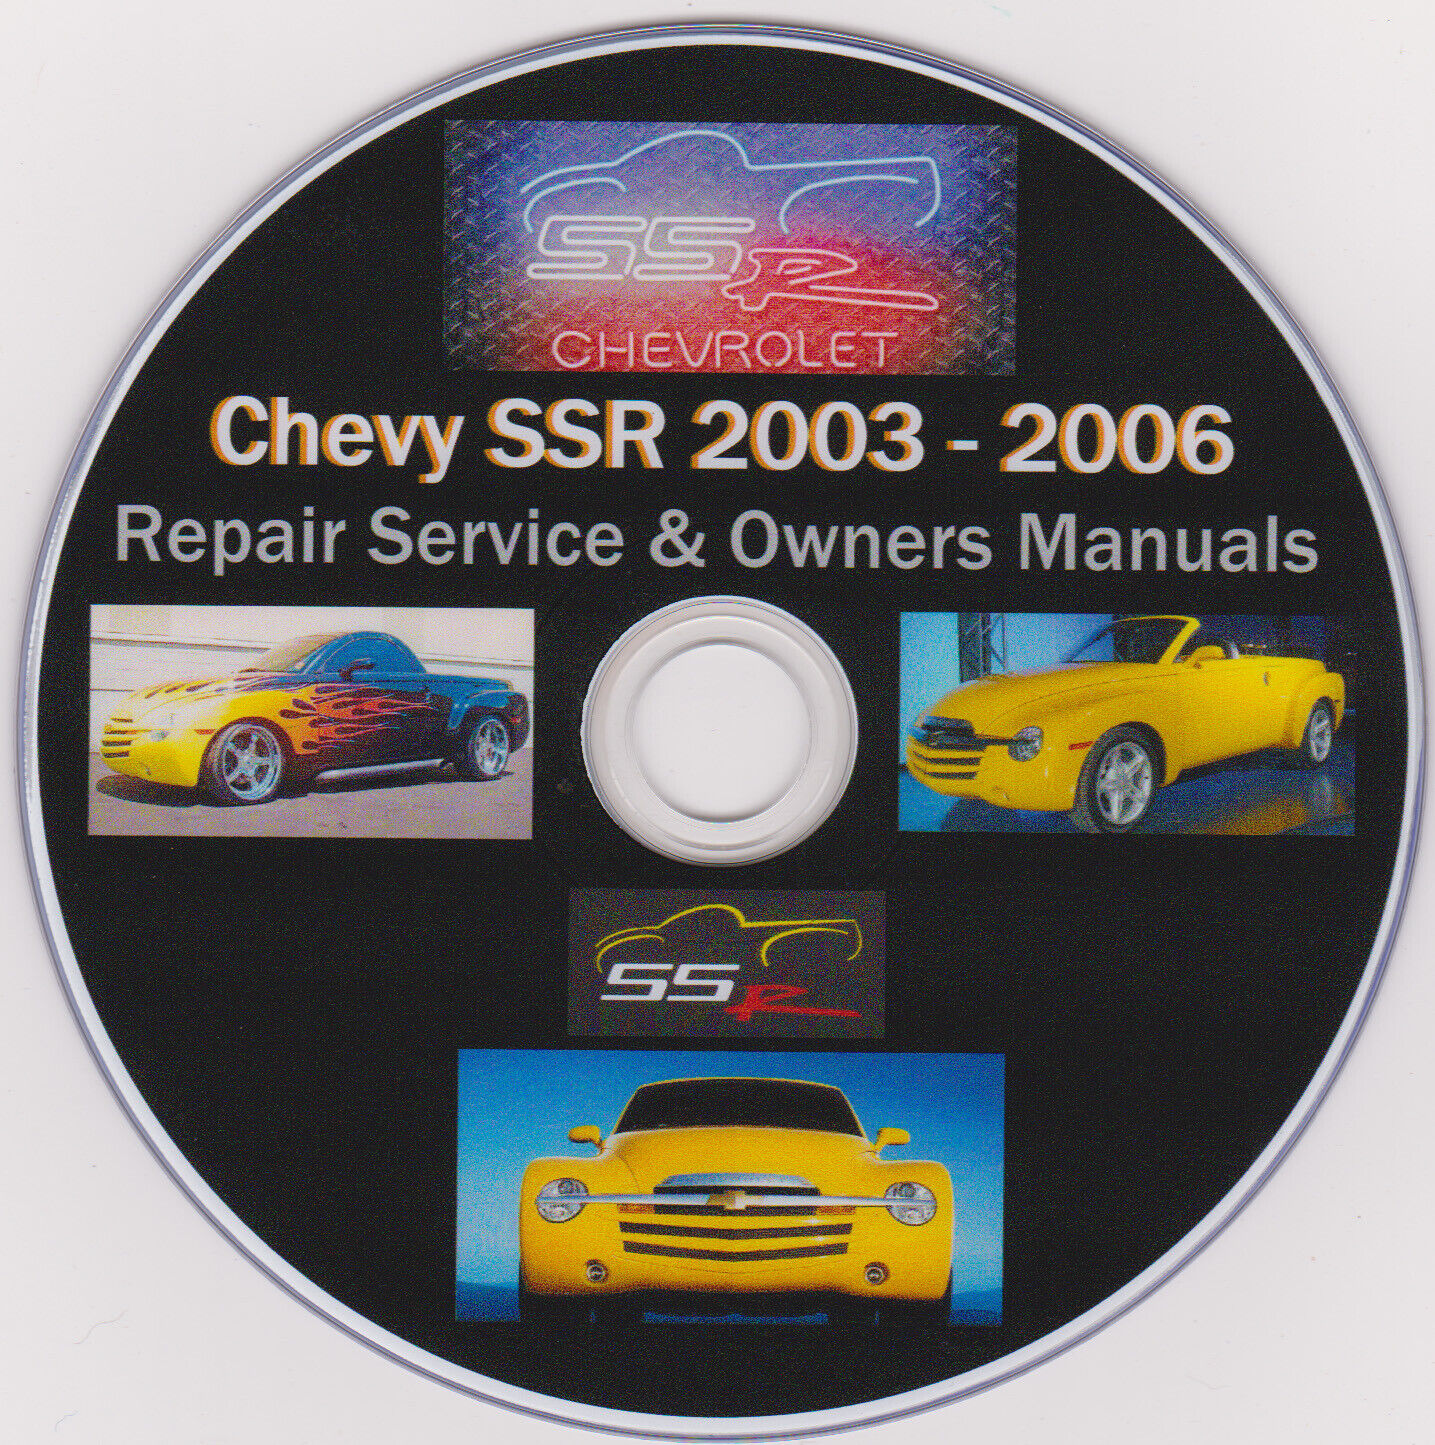 Chevy SSR 2003 -2006 Ultimate Manual Collection Service MANUALS PLUS Extras 